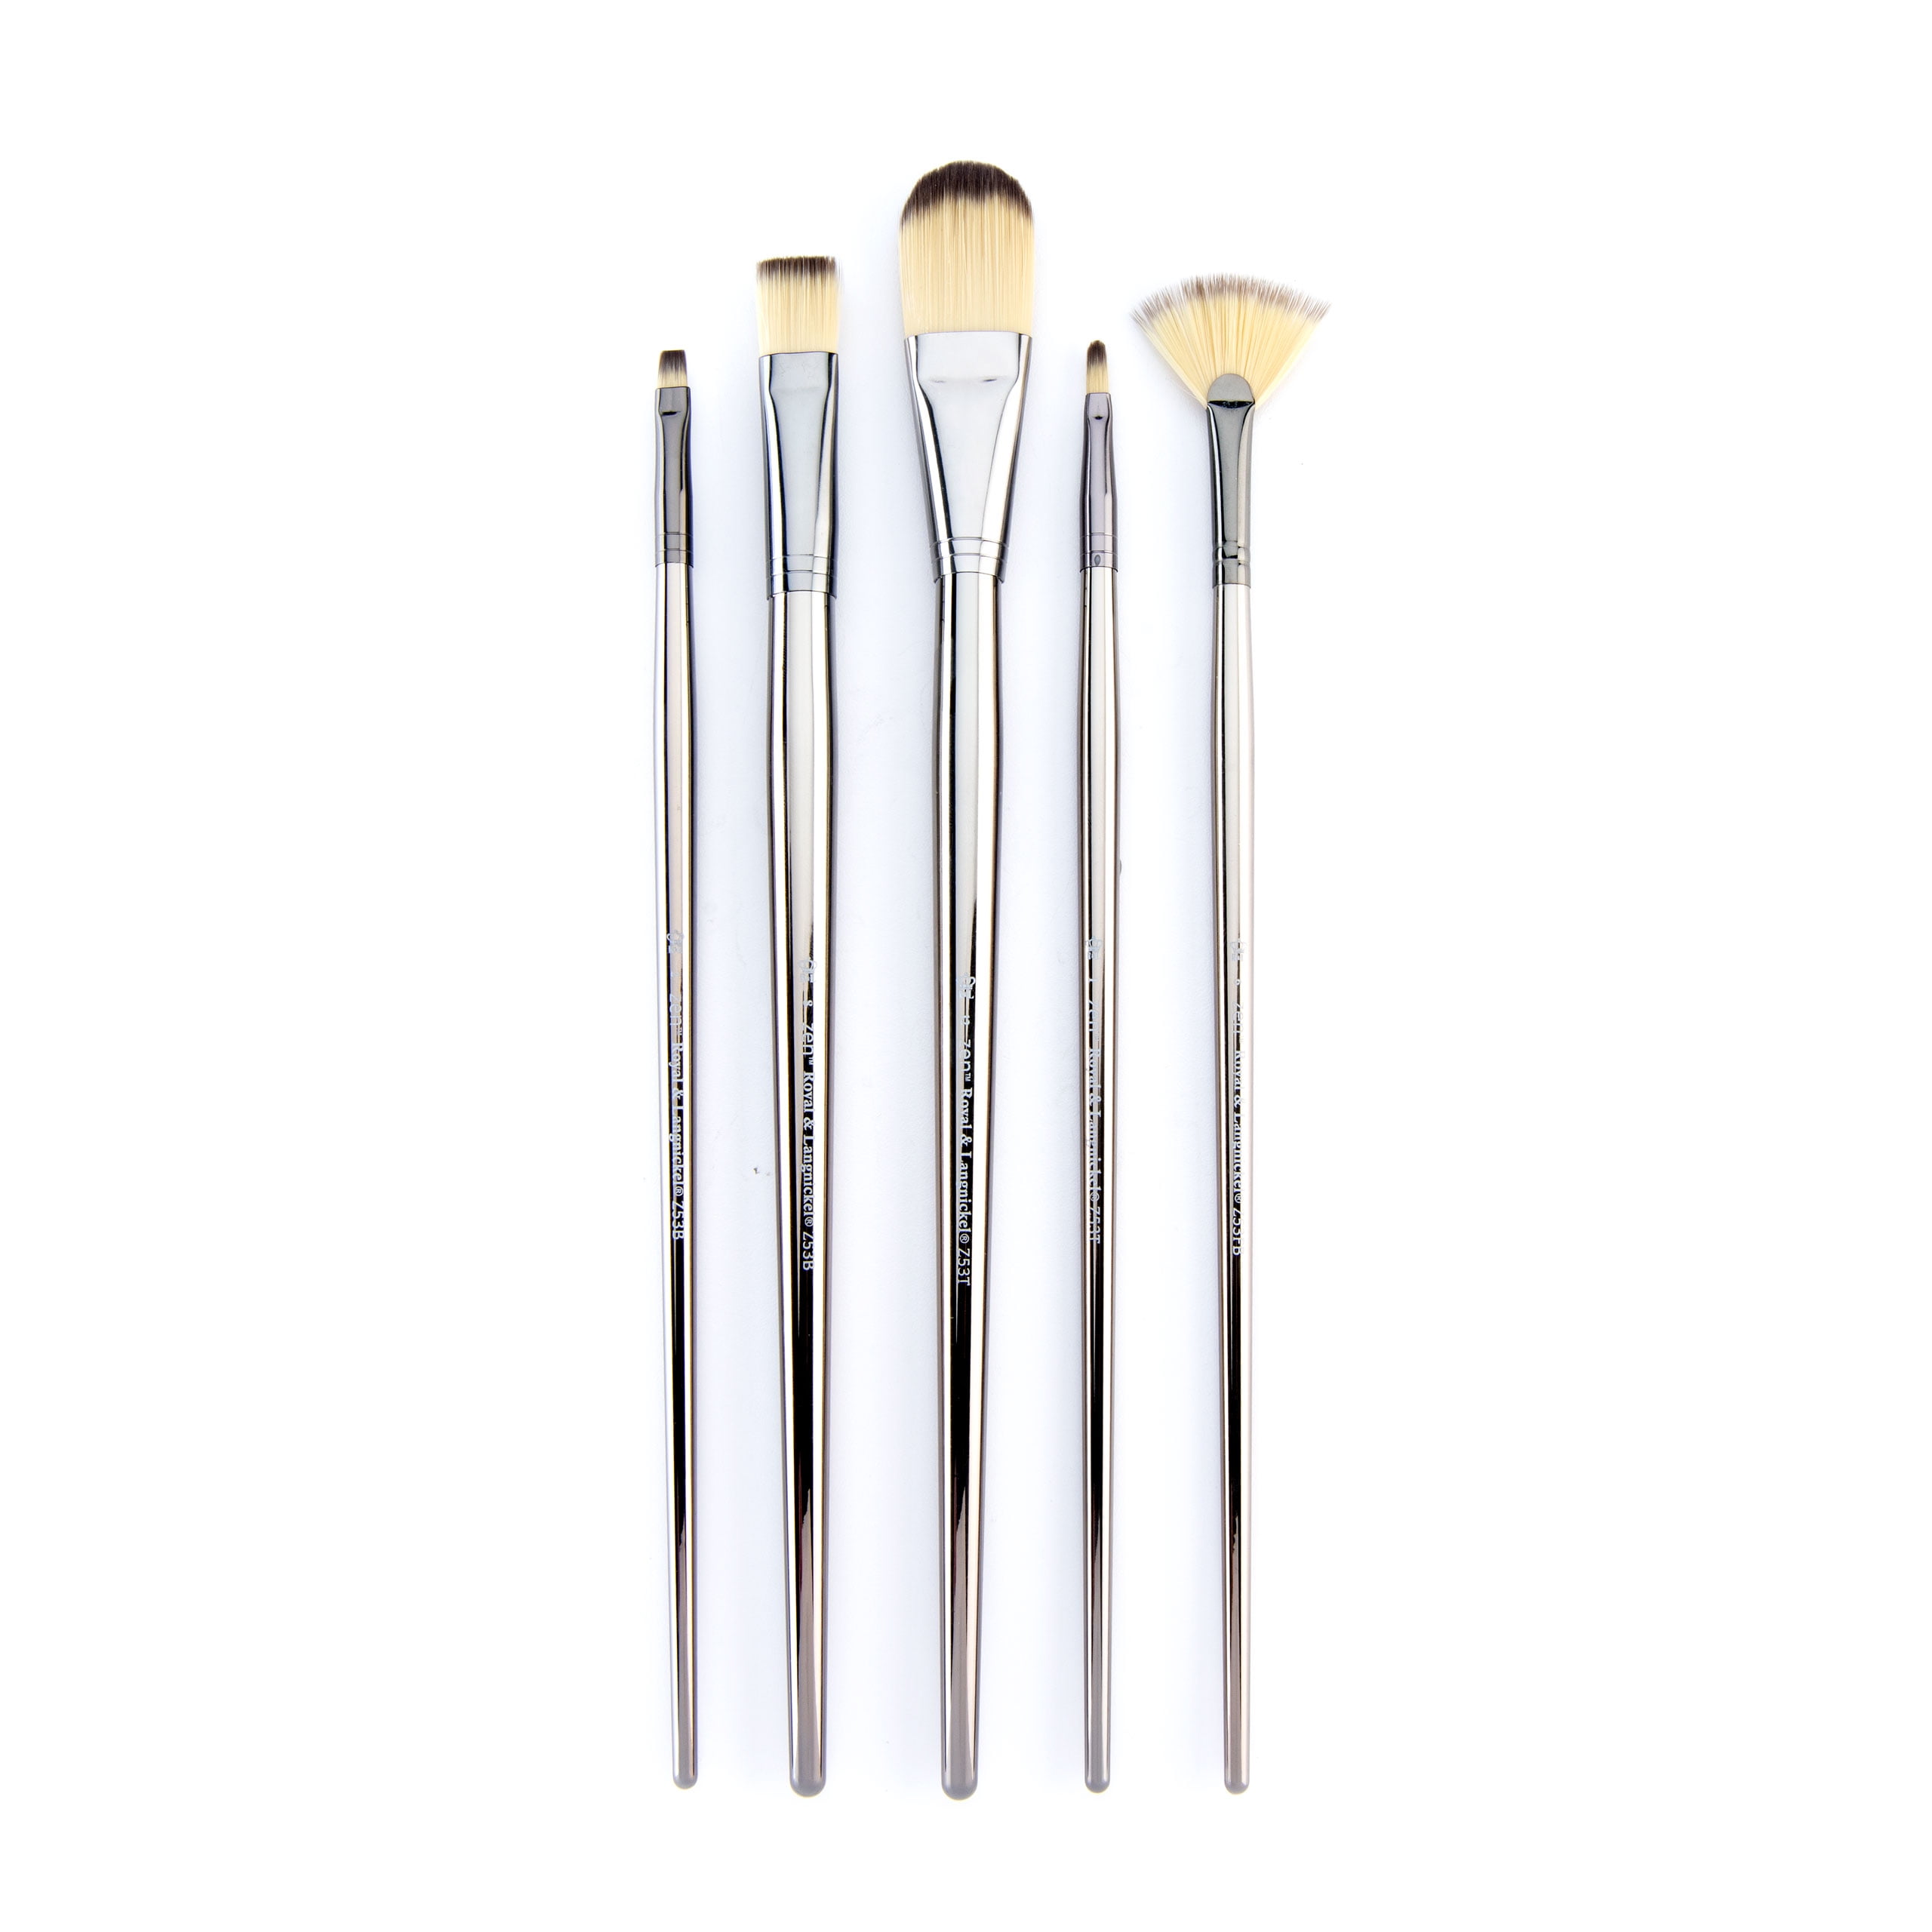 12 Pcs 1 inch Flat Paint Brush for Acrylic Painting Wooden Handle Nylon Craft Brushes for Watercolor Oil Crafts Face Body Art